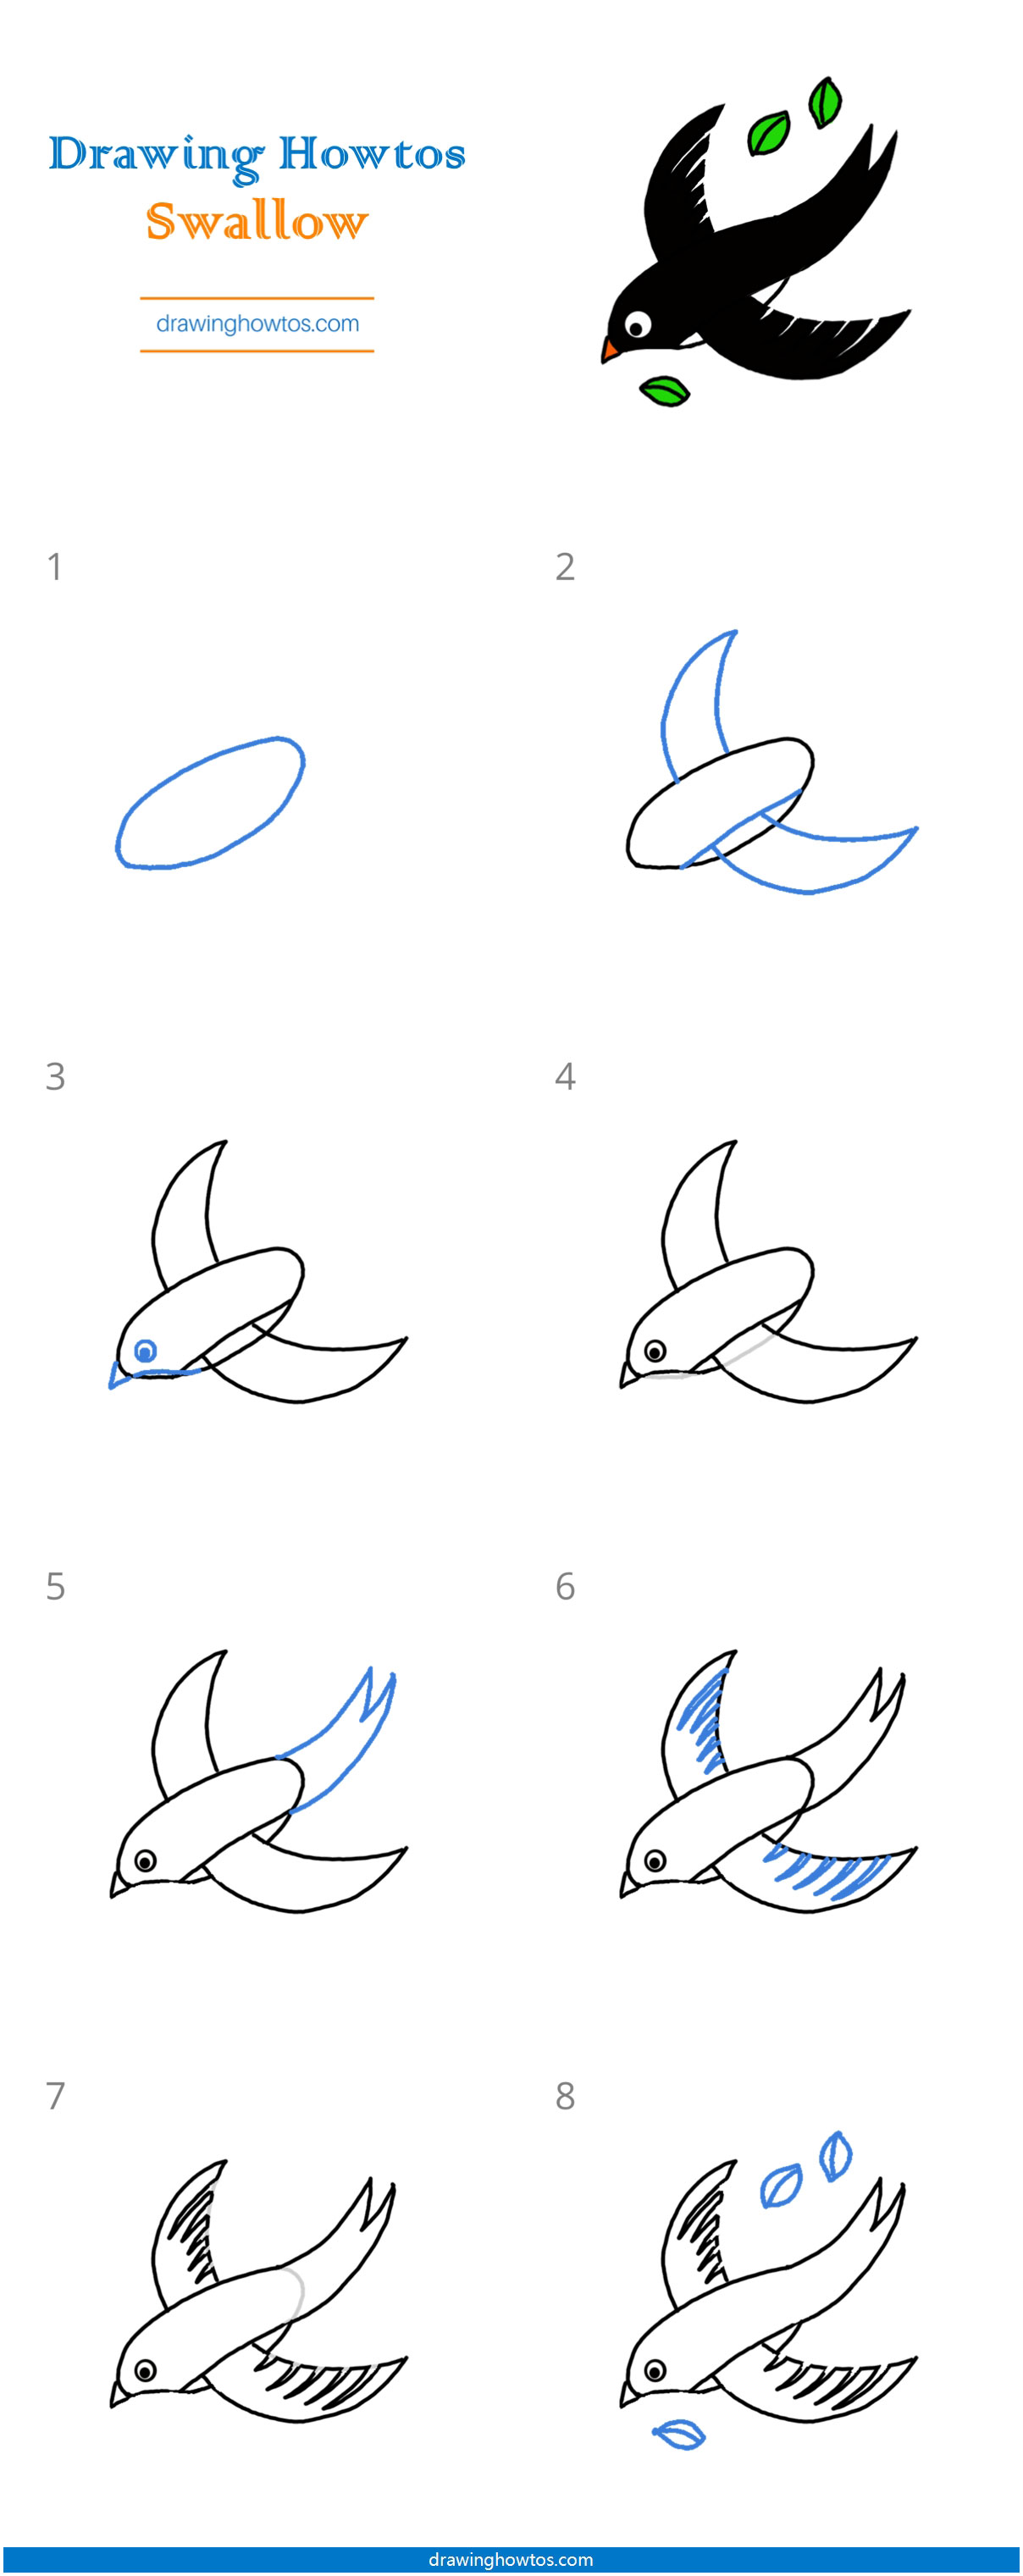 How to Draw a Swallow Step by Step